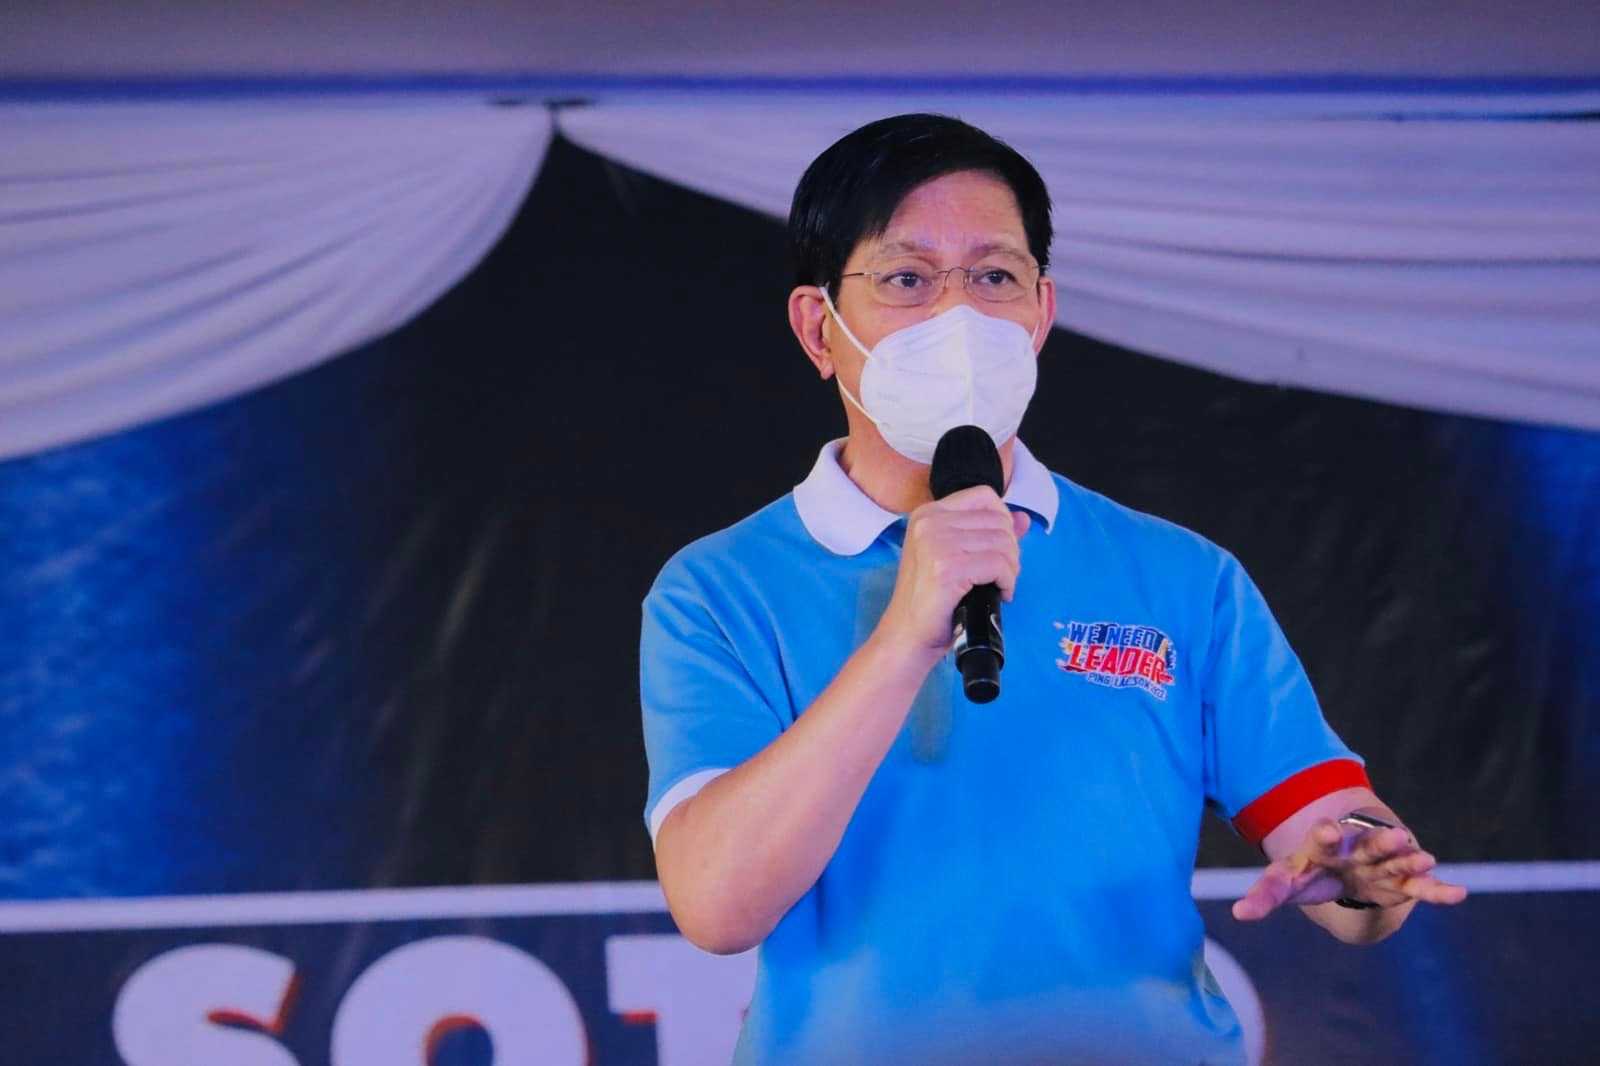 What's next for Lacson? 'I'm going home'